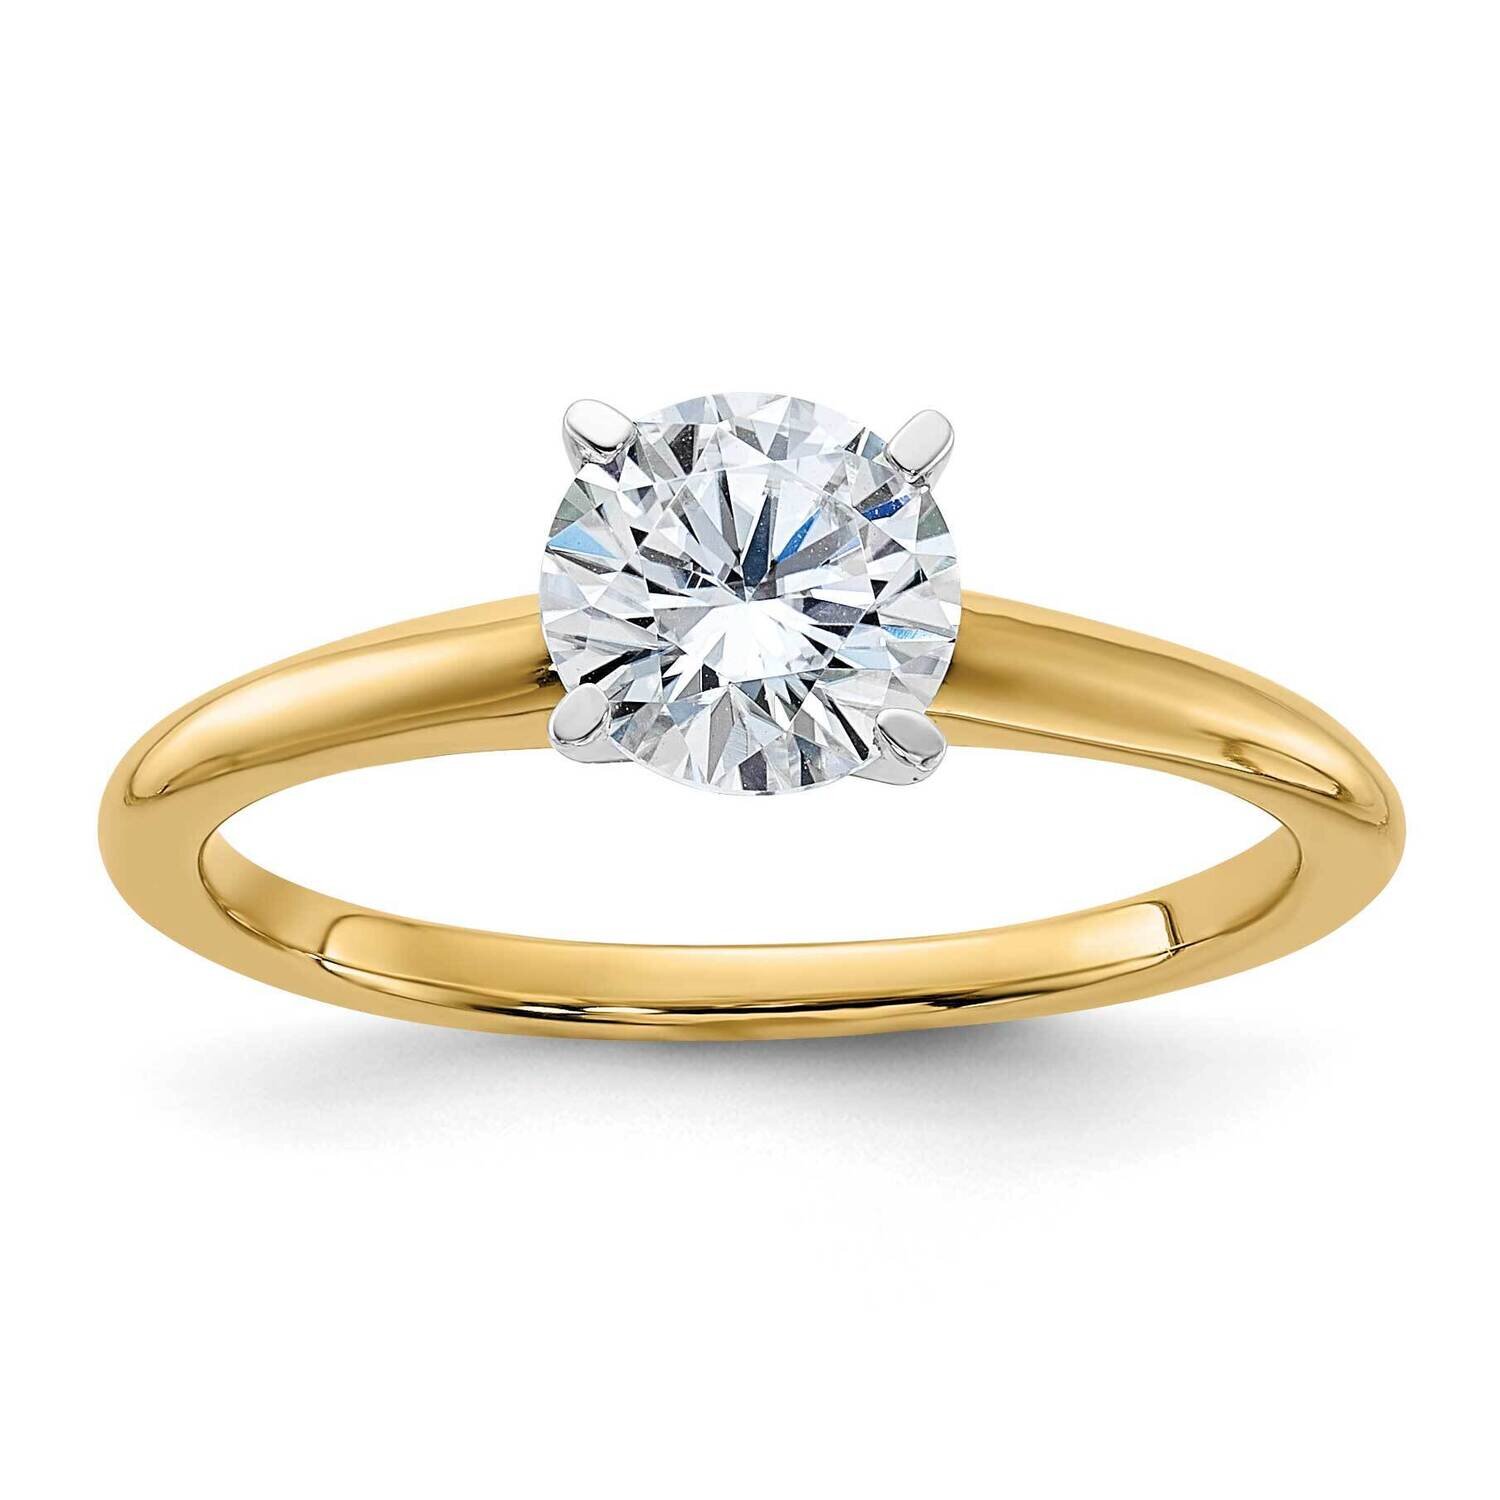 1ct. D E F Pure Light Round Moissanite Solitaire Ring 14k Two Tone Gold RM5965R-100-7MP